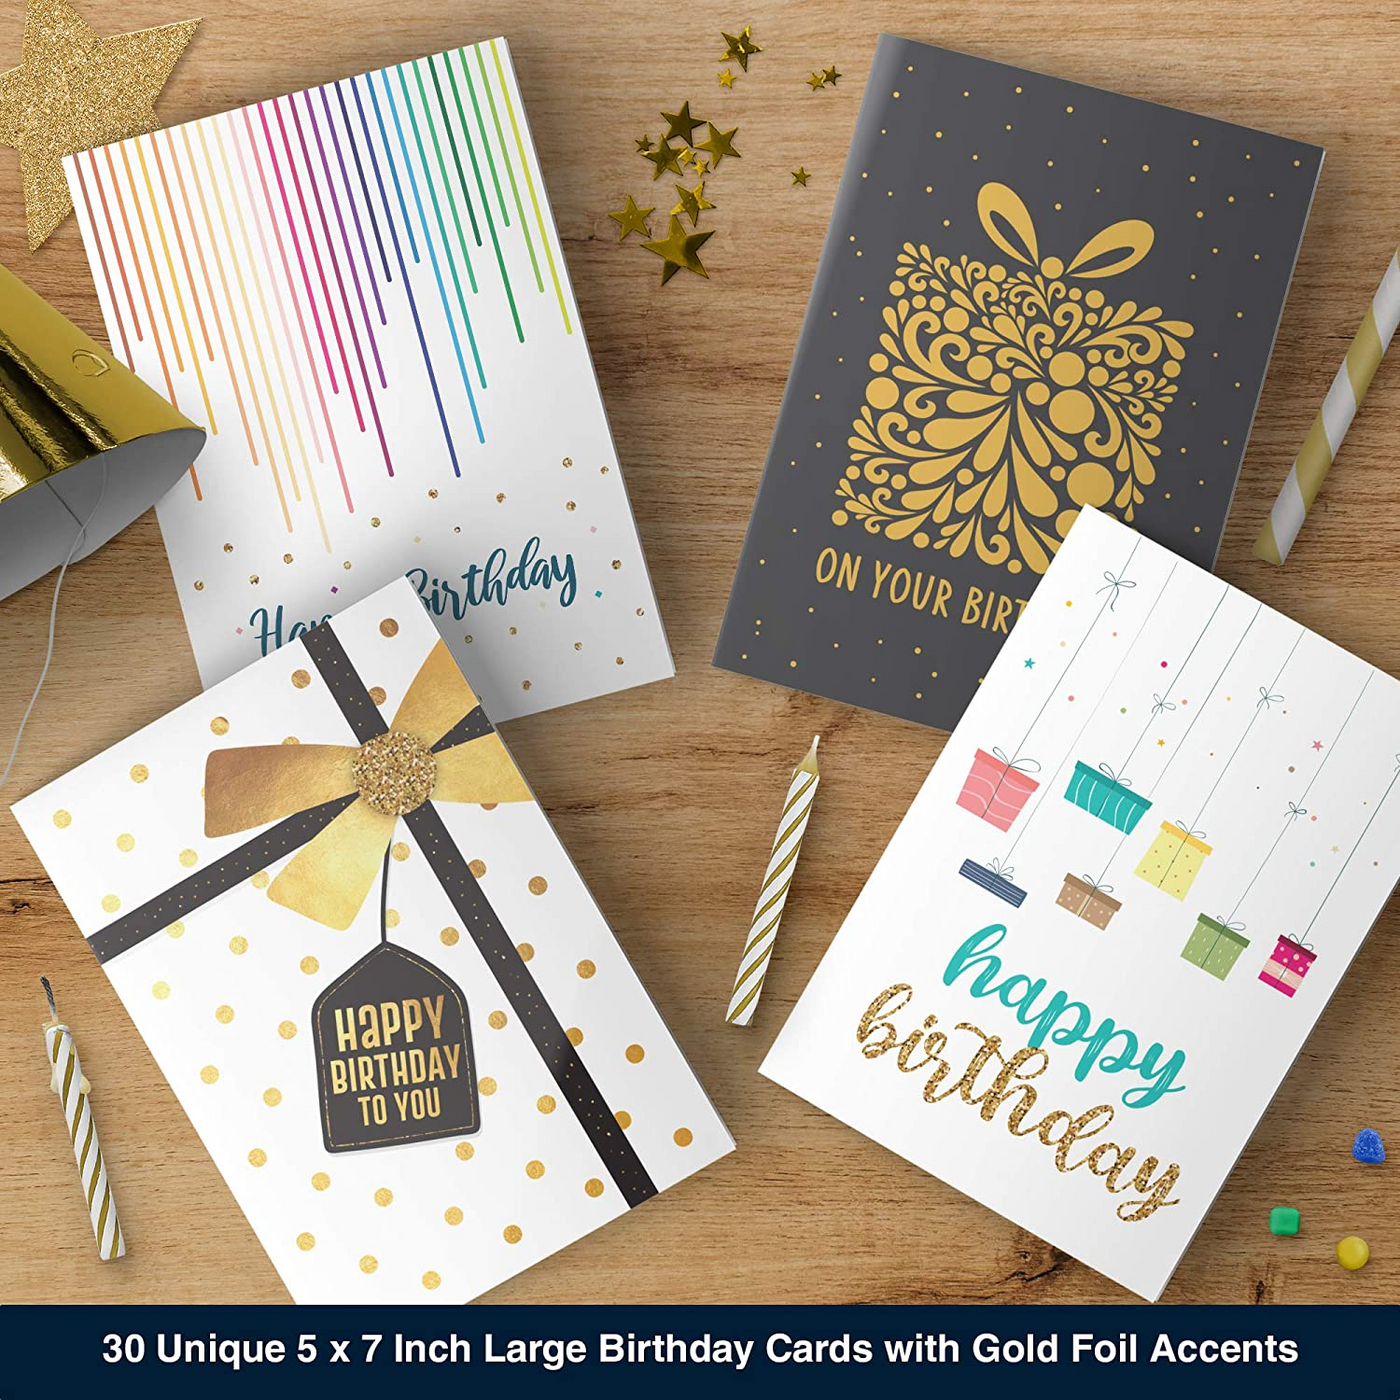 Dessie 30 Unique Happy Birthday Cards - 30 Gold Foil Birthday Cards Bulk With Message Inside